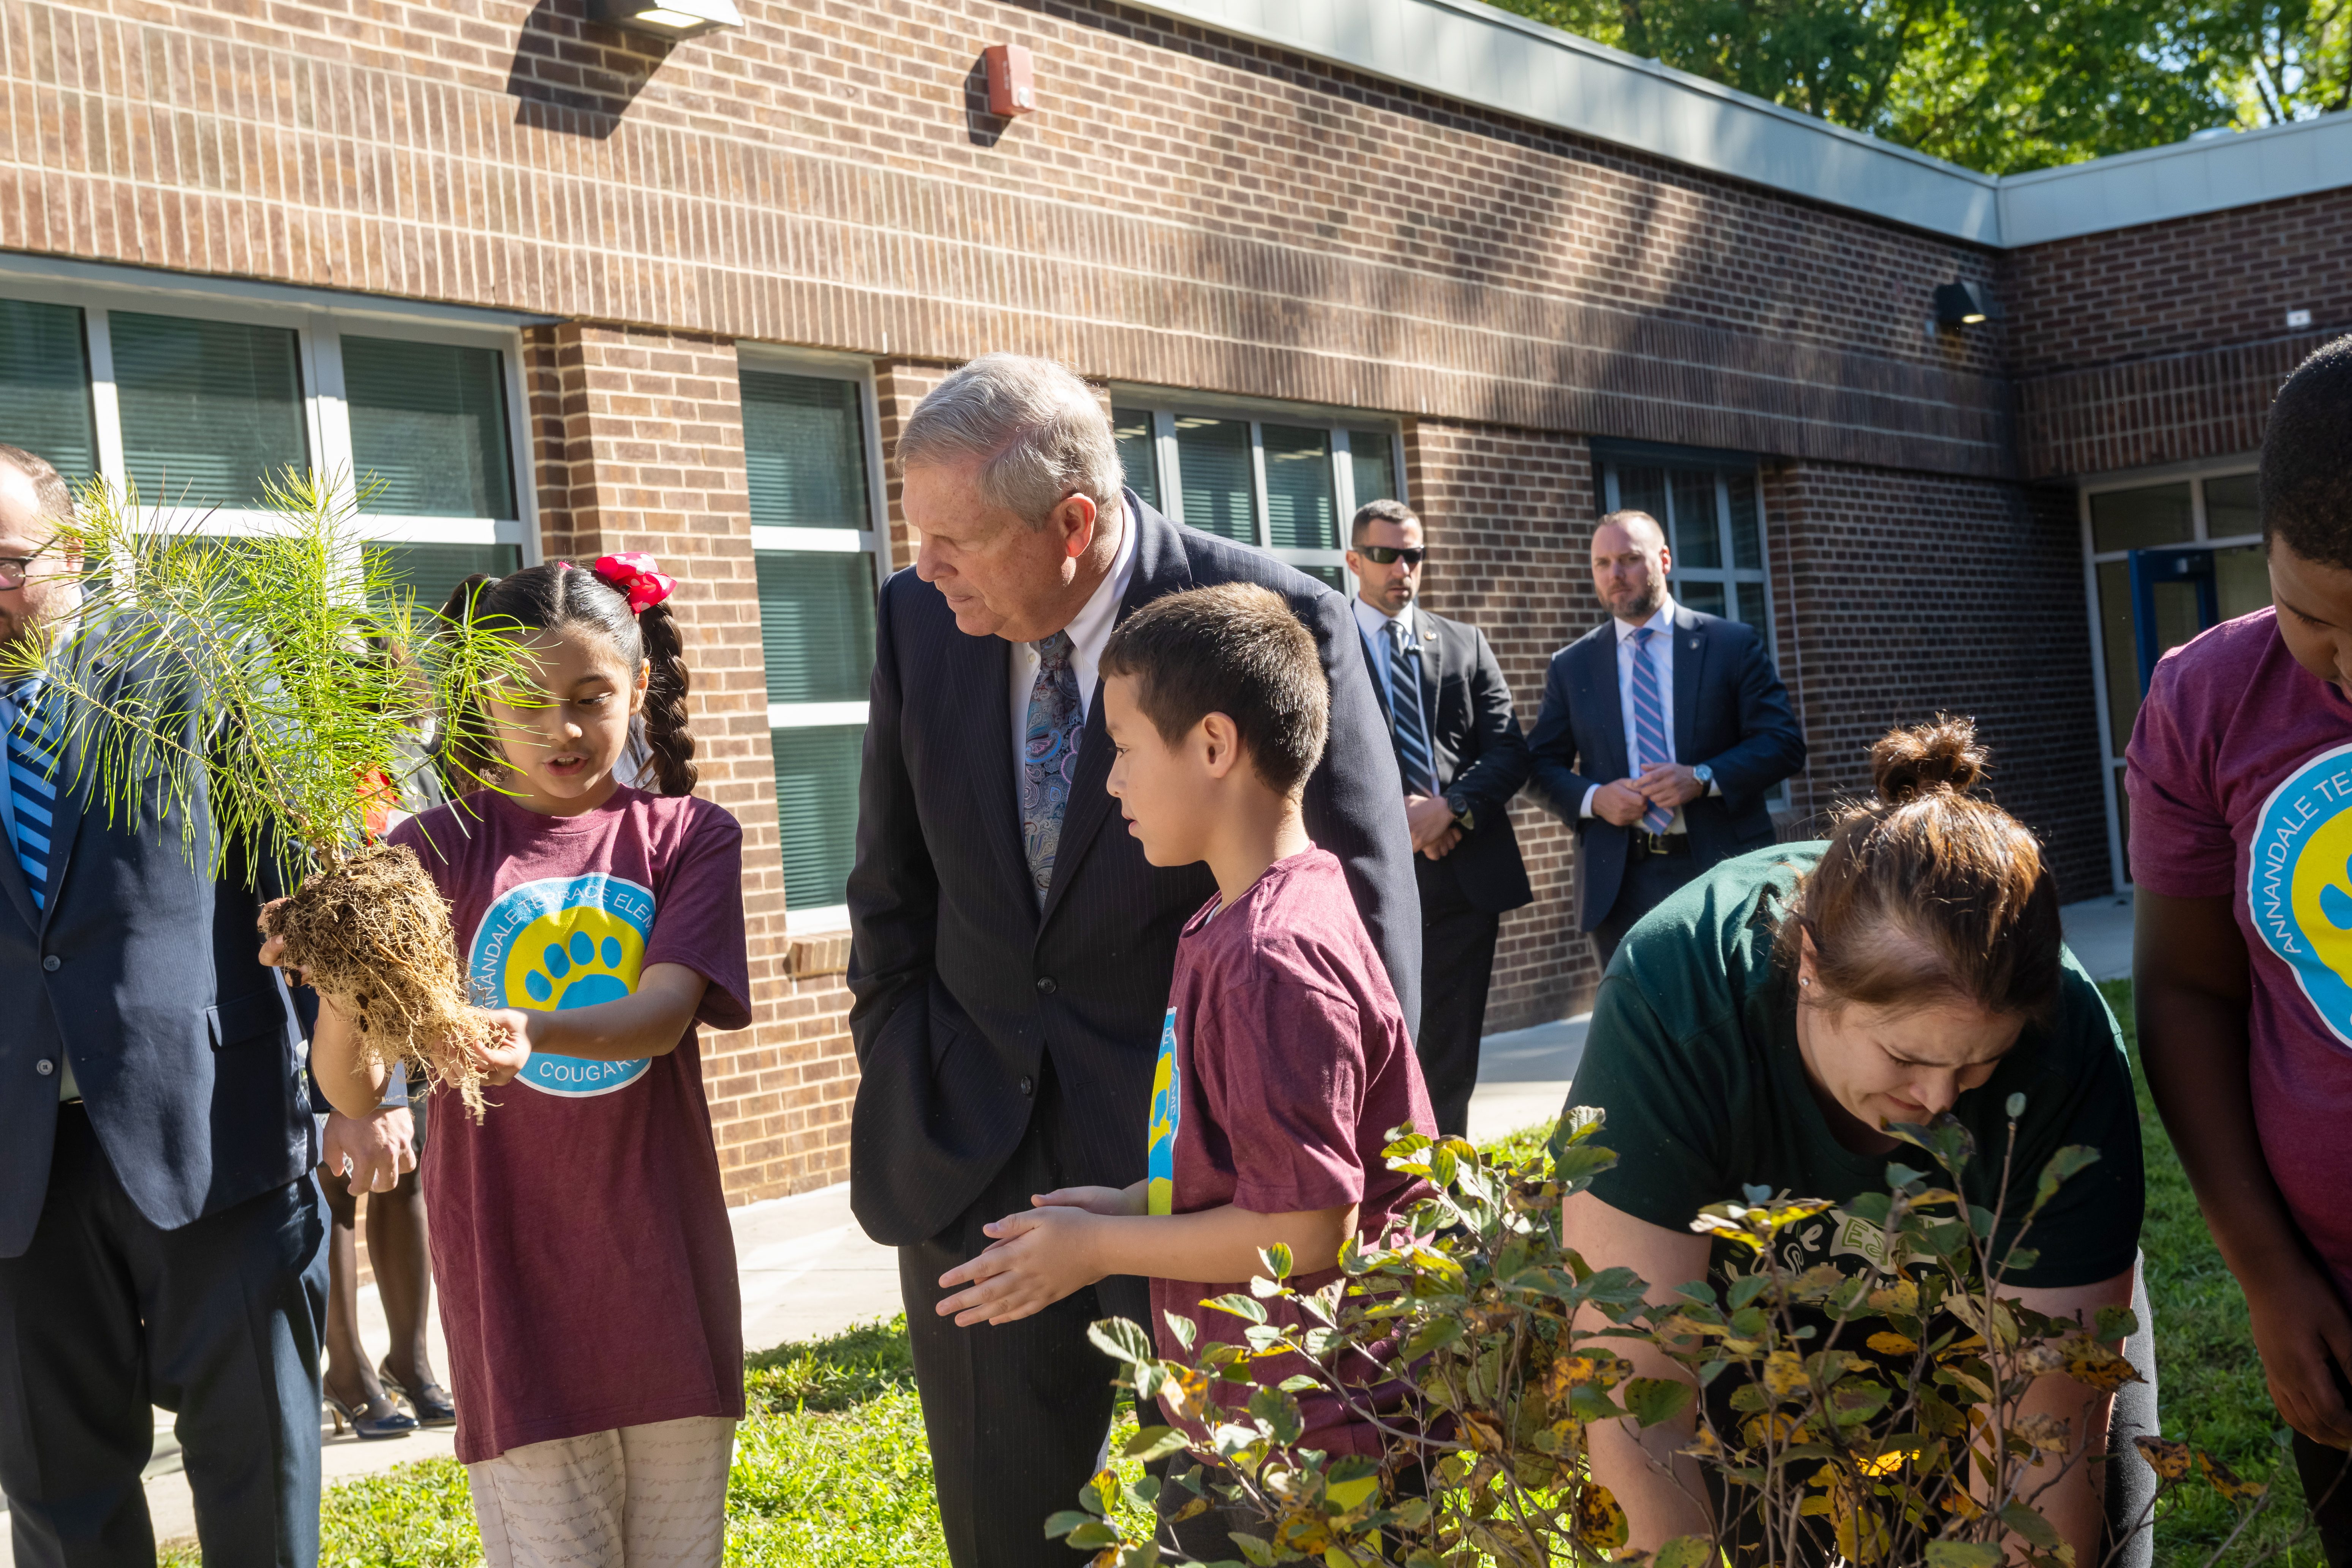 Annandale Terrace Elementary School fifth-graders chat with U.S. Department of Agriculture Secretary Tom Vilsack while they work in their school's learning garden.